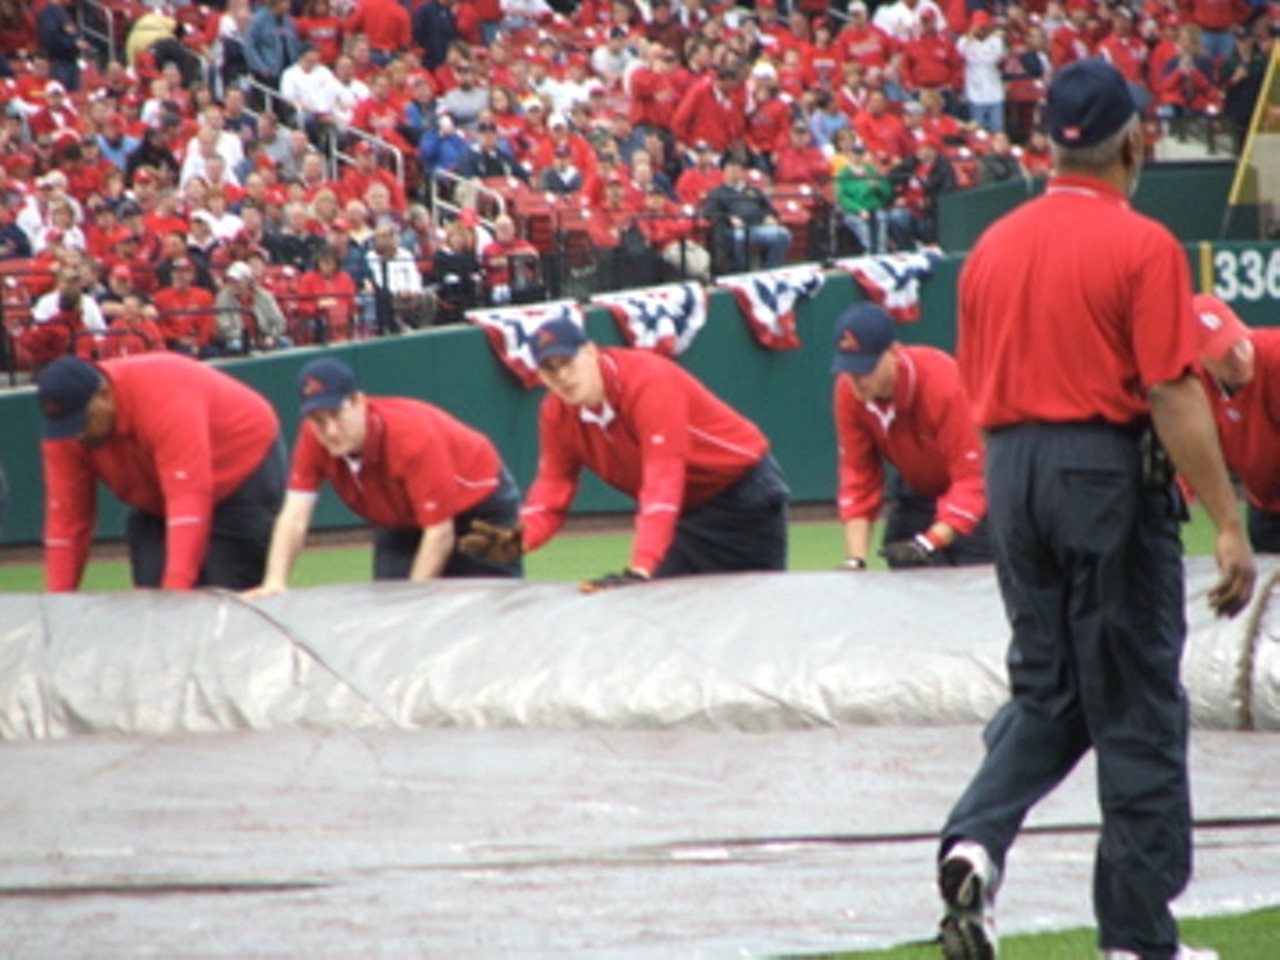 Practicing for the rain. The grounds crew rolled out the tarp for real a few innings later.